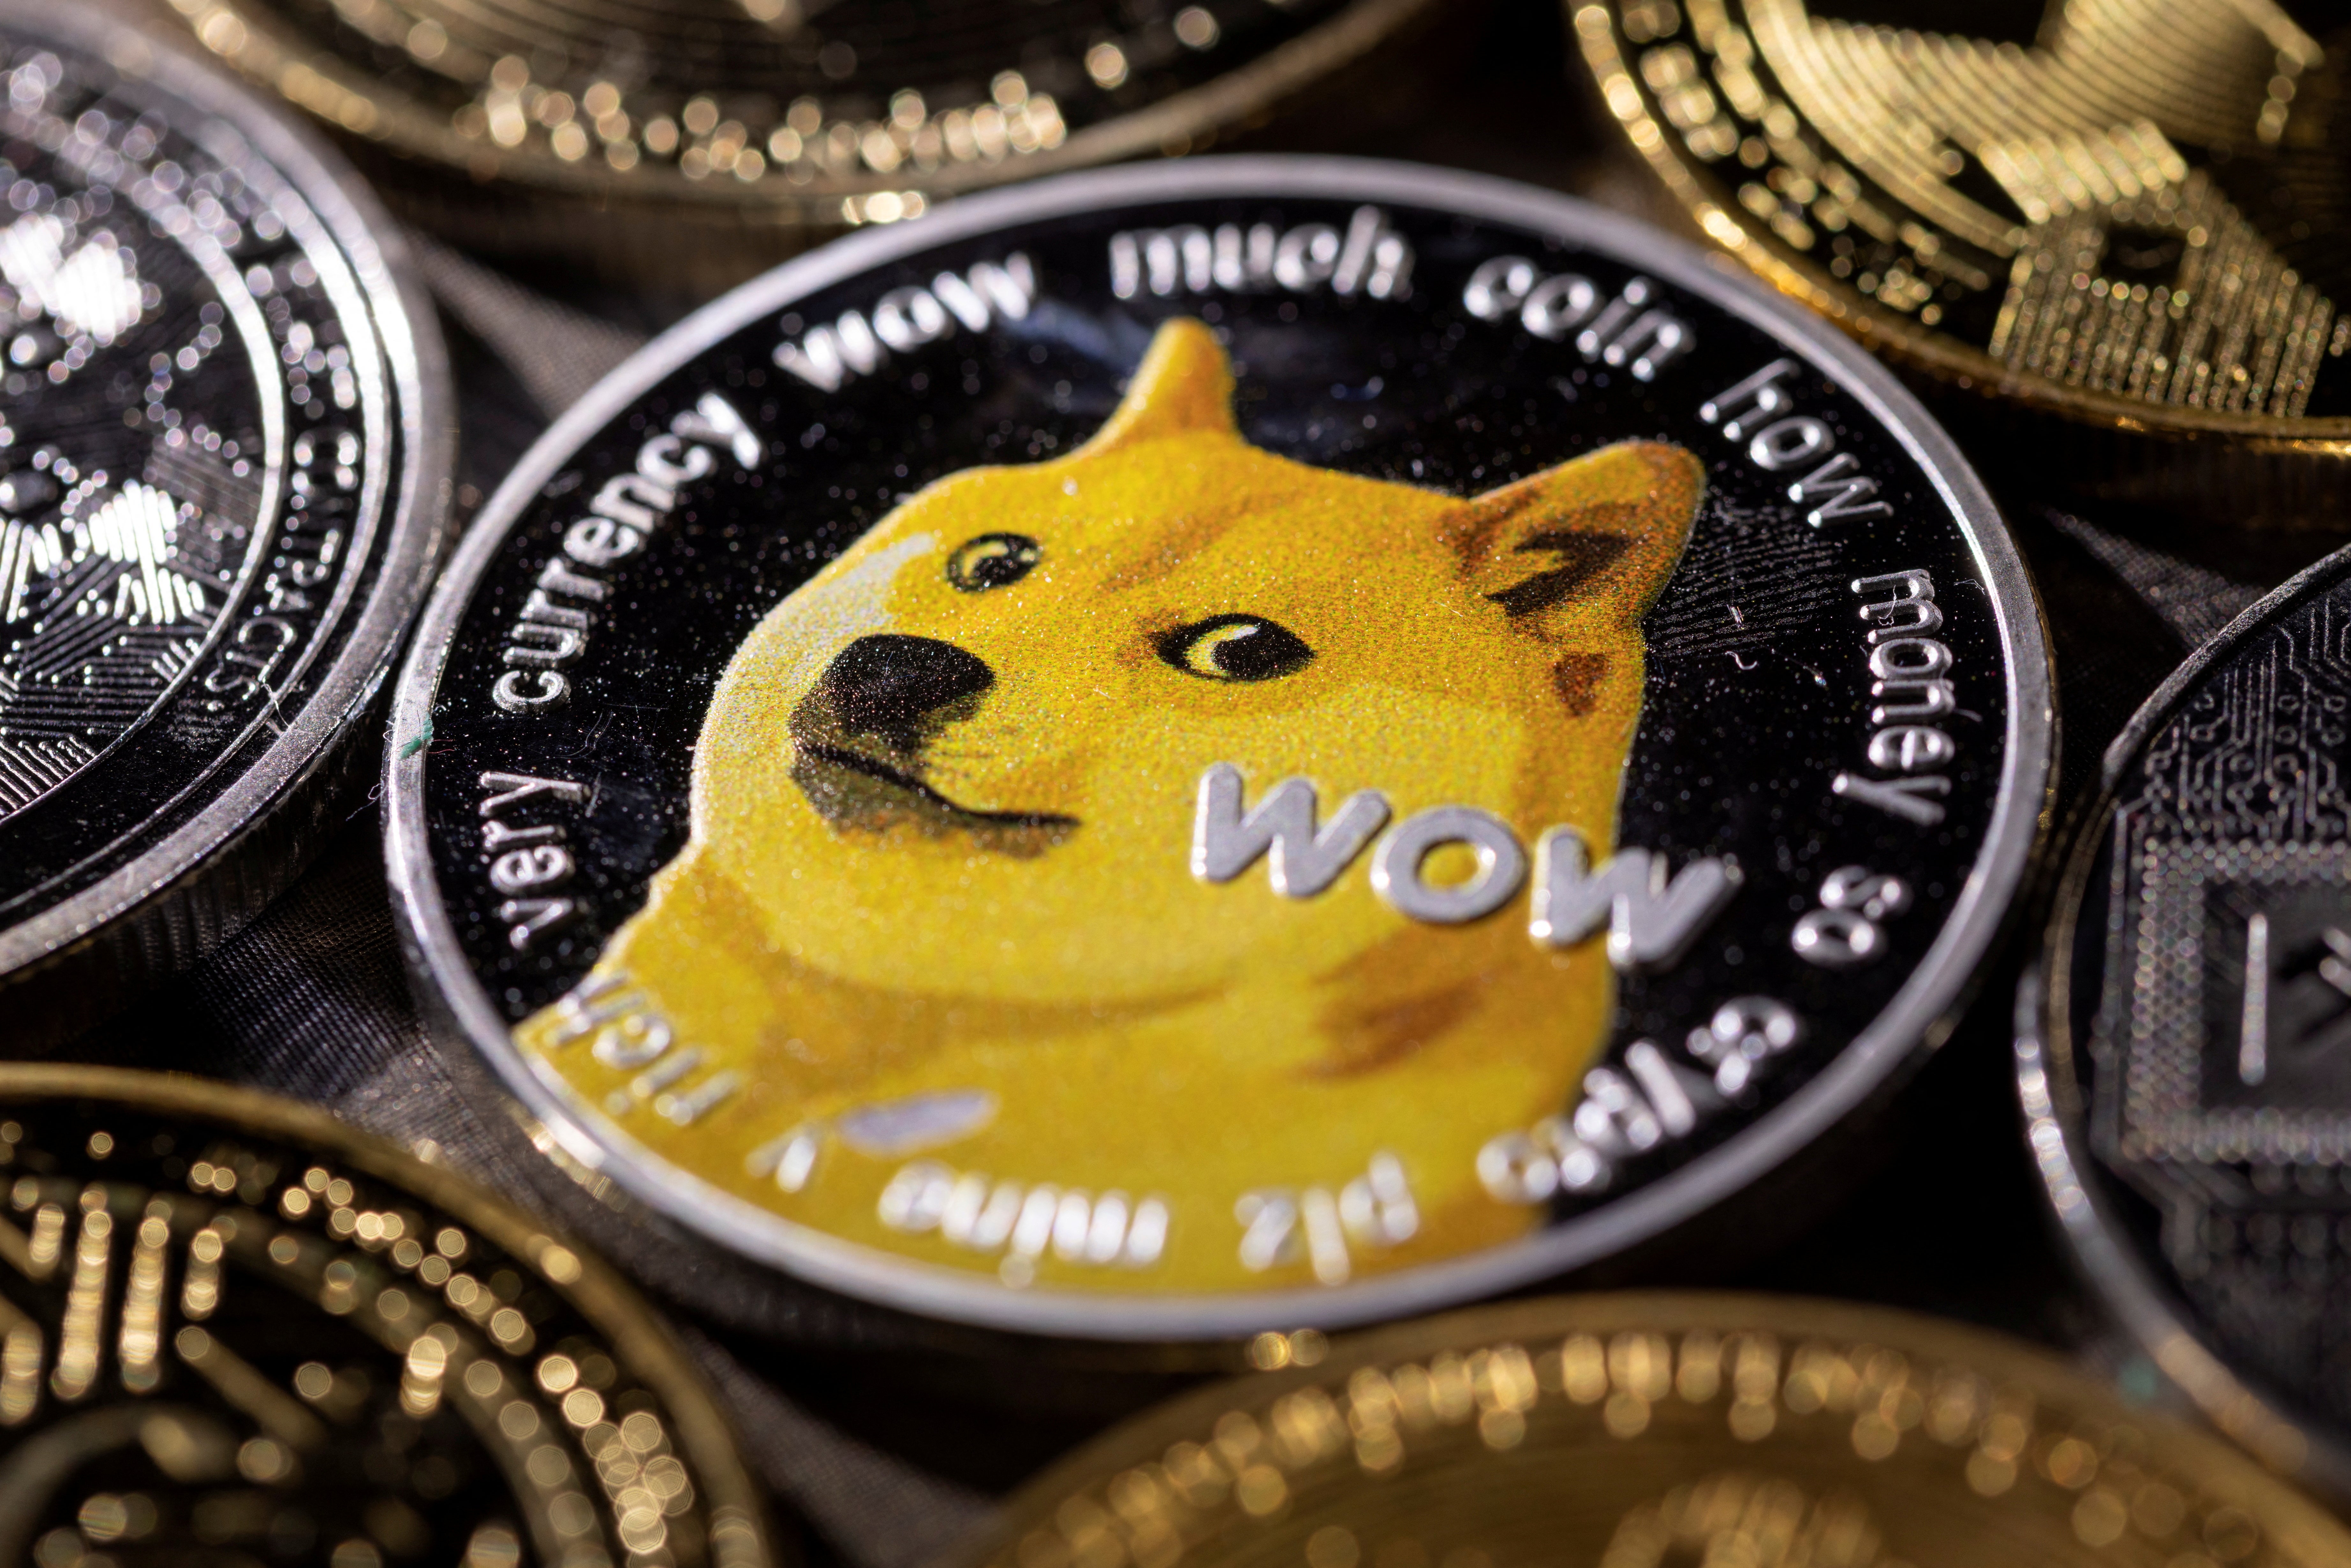 The dog-faced token is worth more than major global corporations such as Nokia and Hewlett-Packard